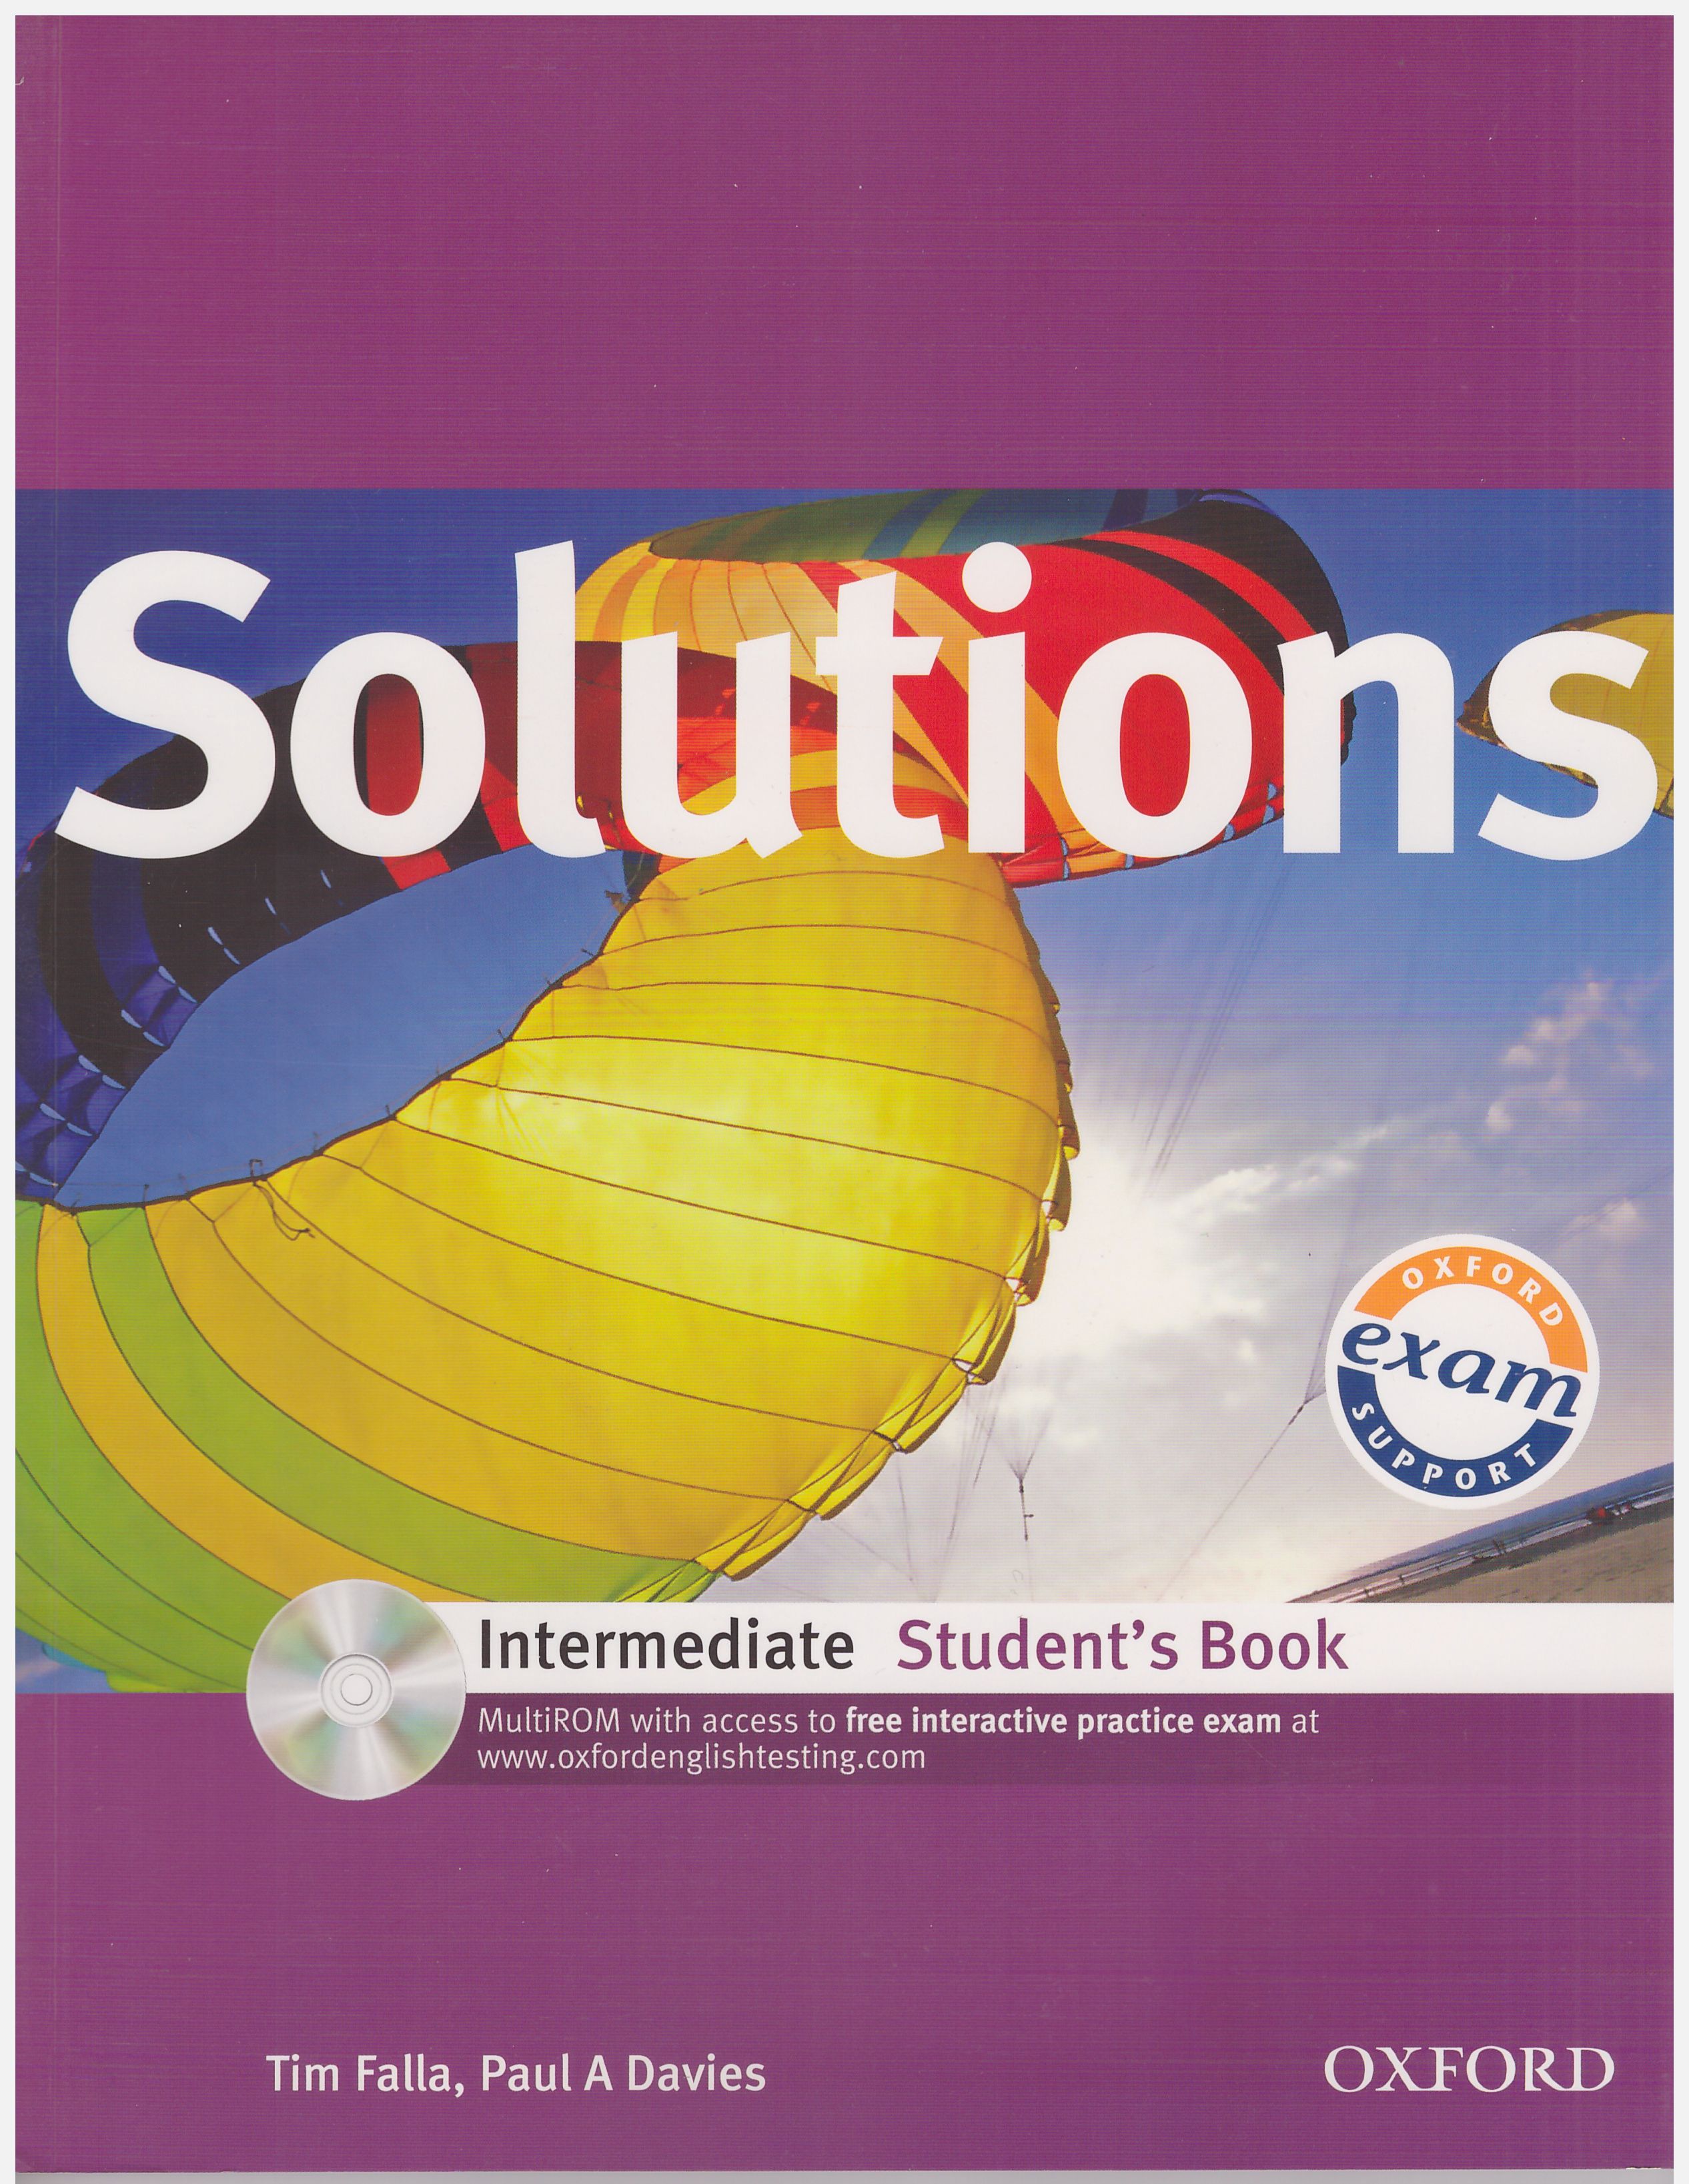 Oxford student s book. Solutions. Intermediate. Solutions Intermediate книга. Solutions Intermediate student's book. Oxford solutions Intermediate students book.